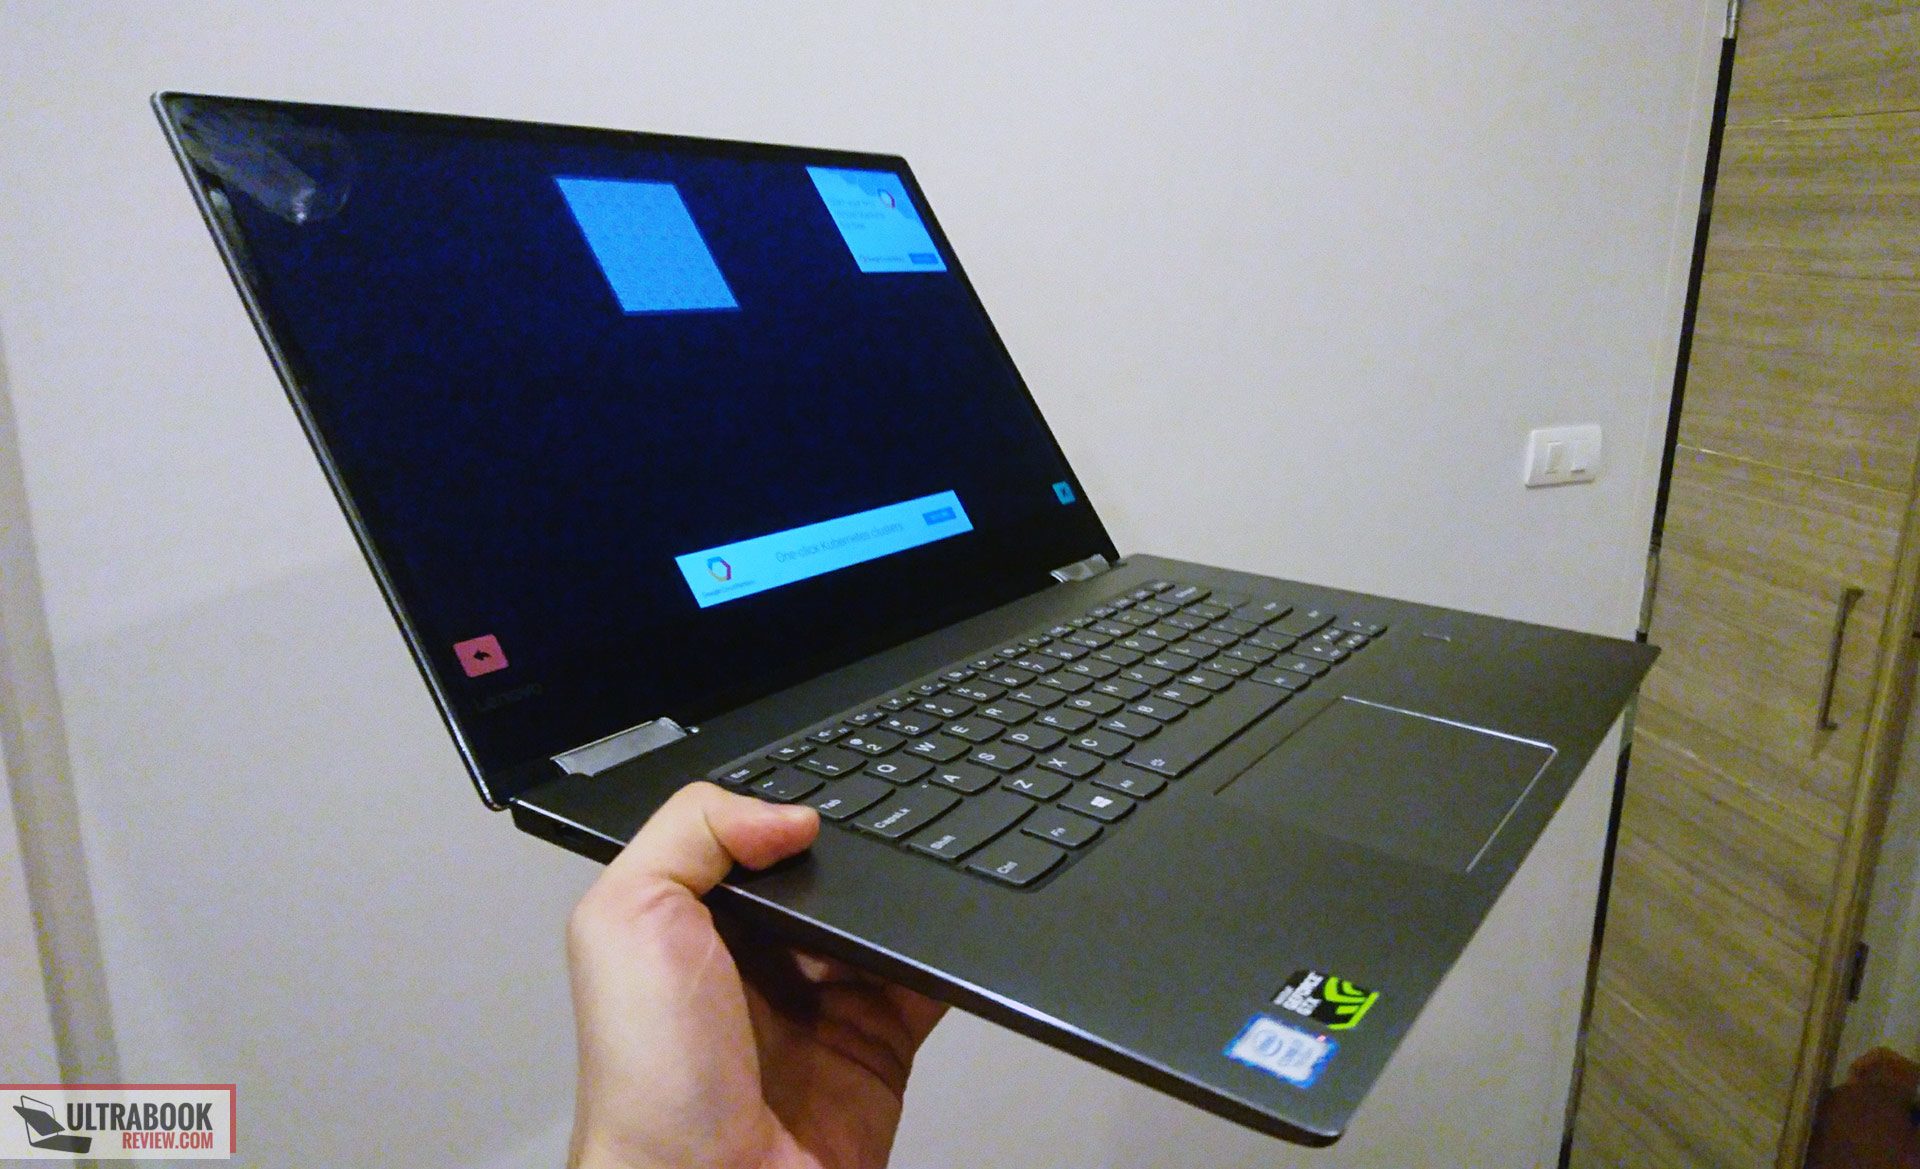 Lenovo Yoga 720 15-inch - first impressions and initial review (vs the Dell XPS 15 9560)